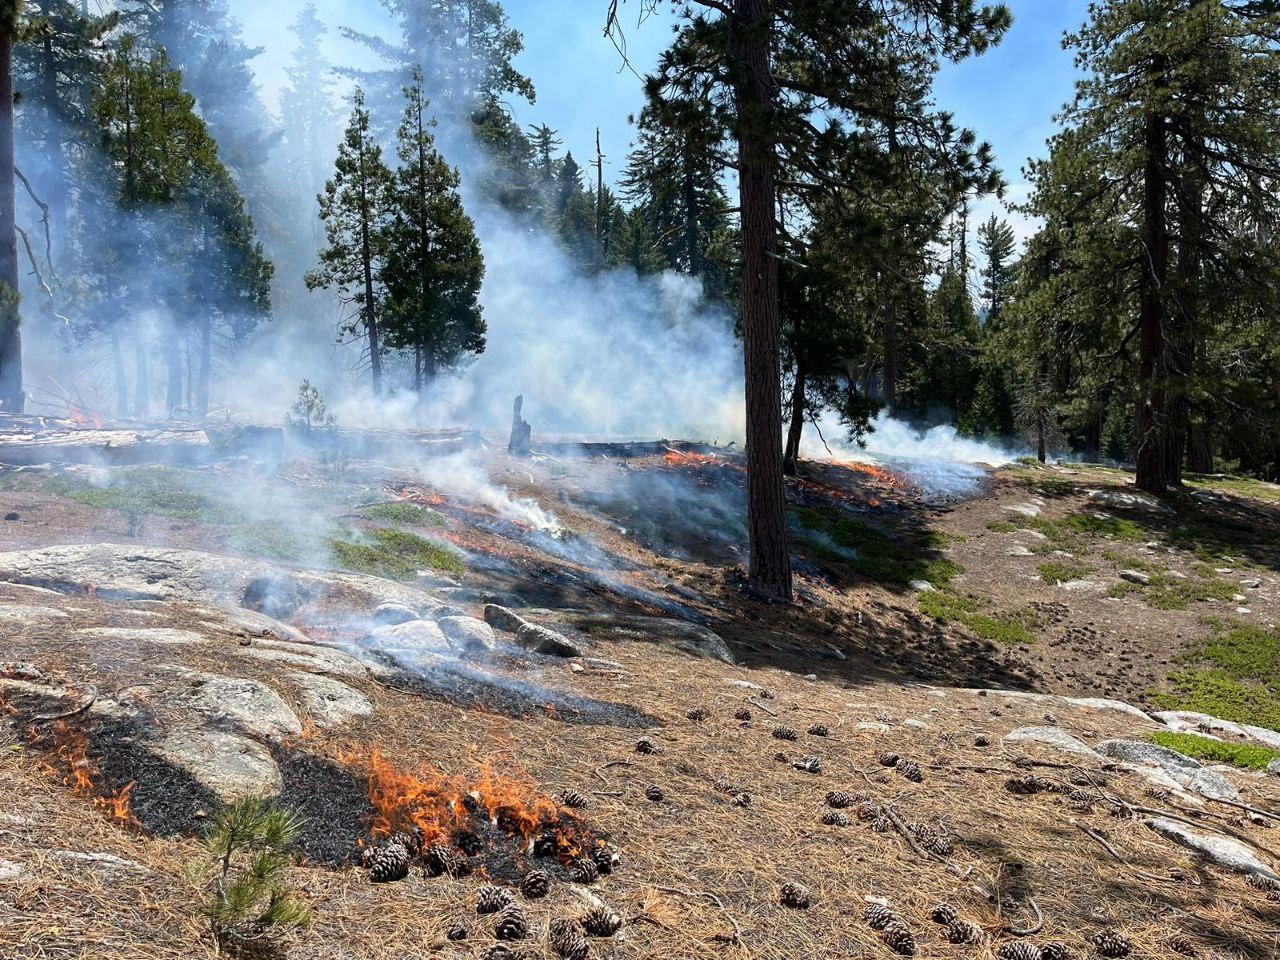 Photo of a forest with fire and smoke. Fuels being consumed.